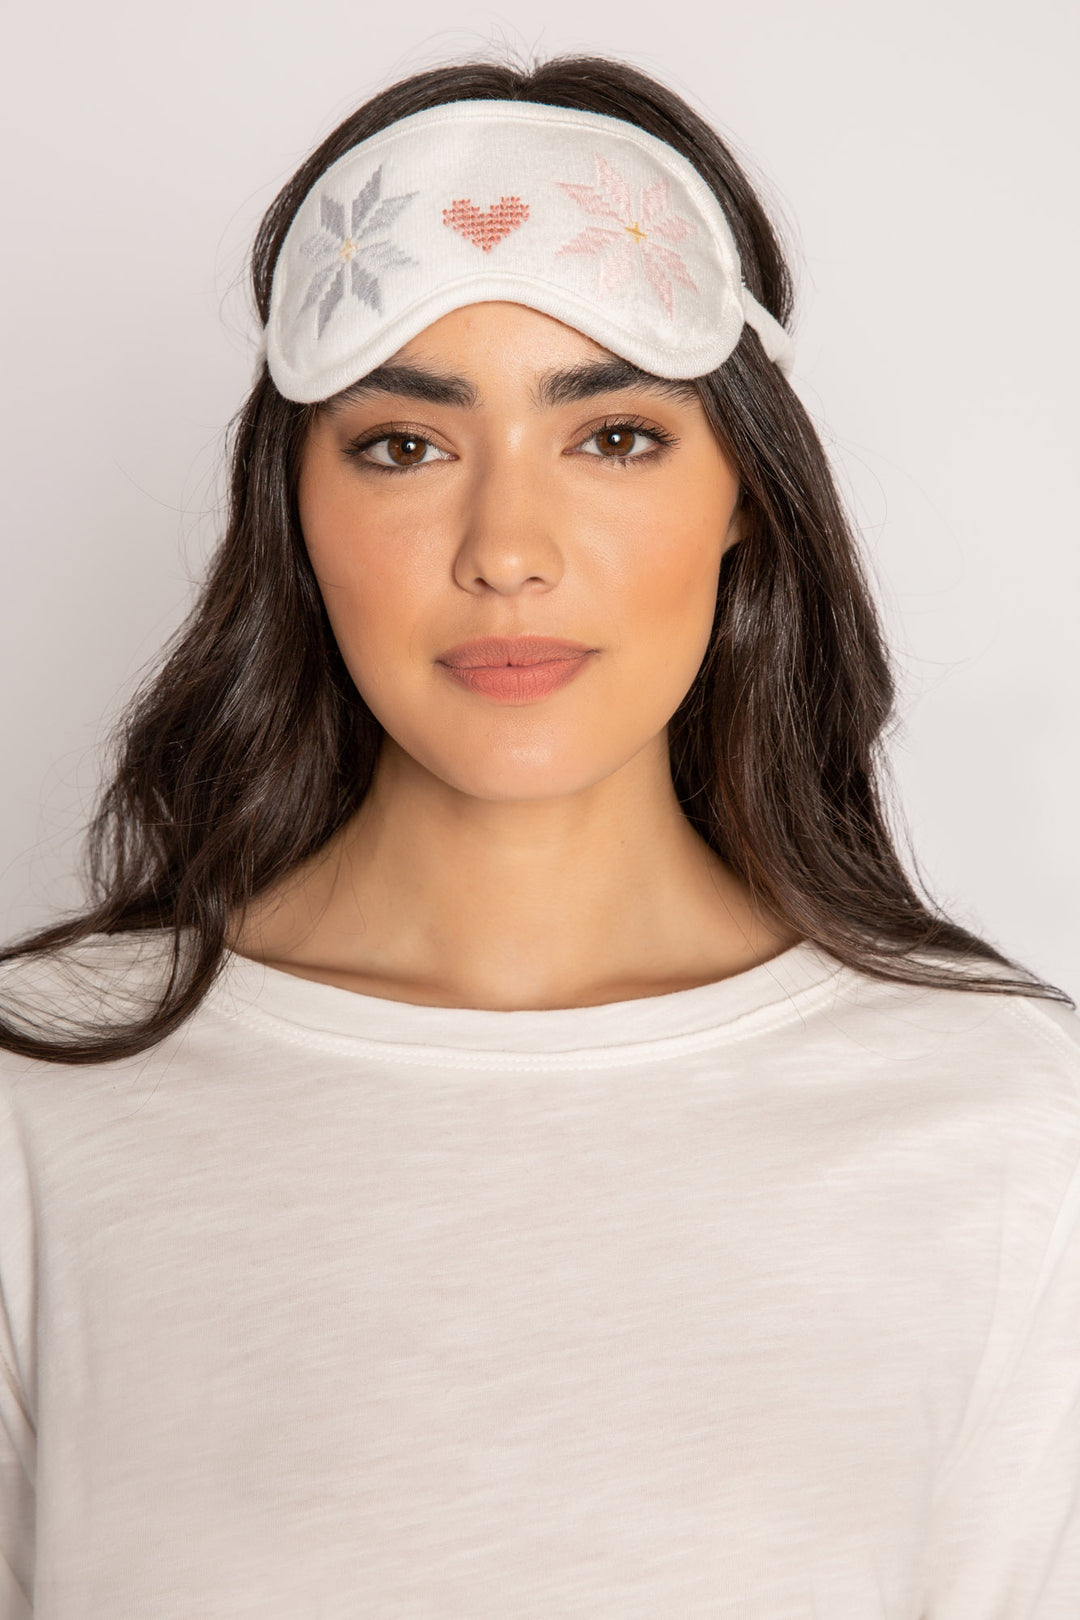 Sleep eye mask in ivory with embroidered snowflake & heart design. (7256838013028)